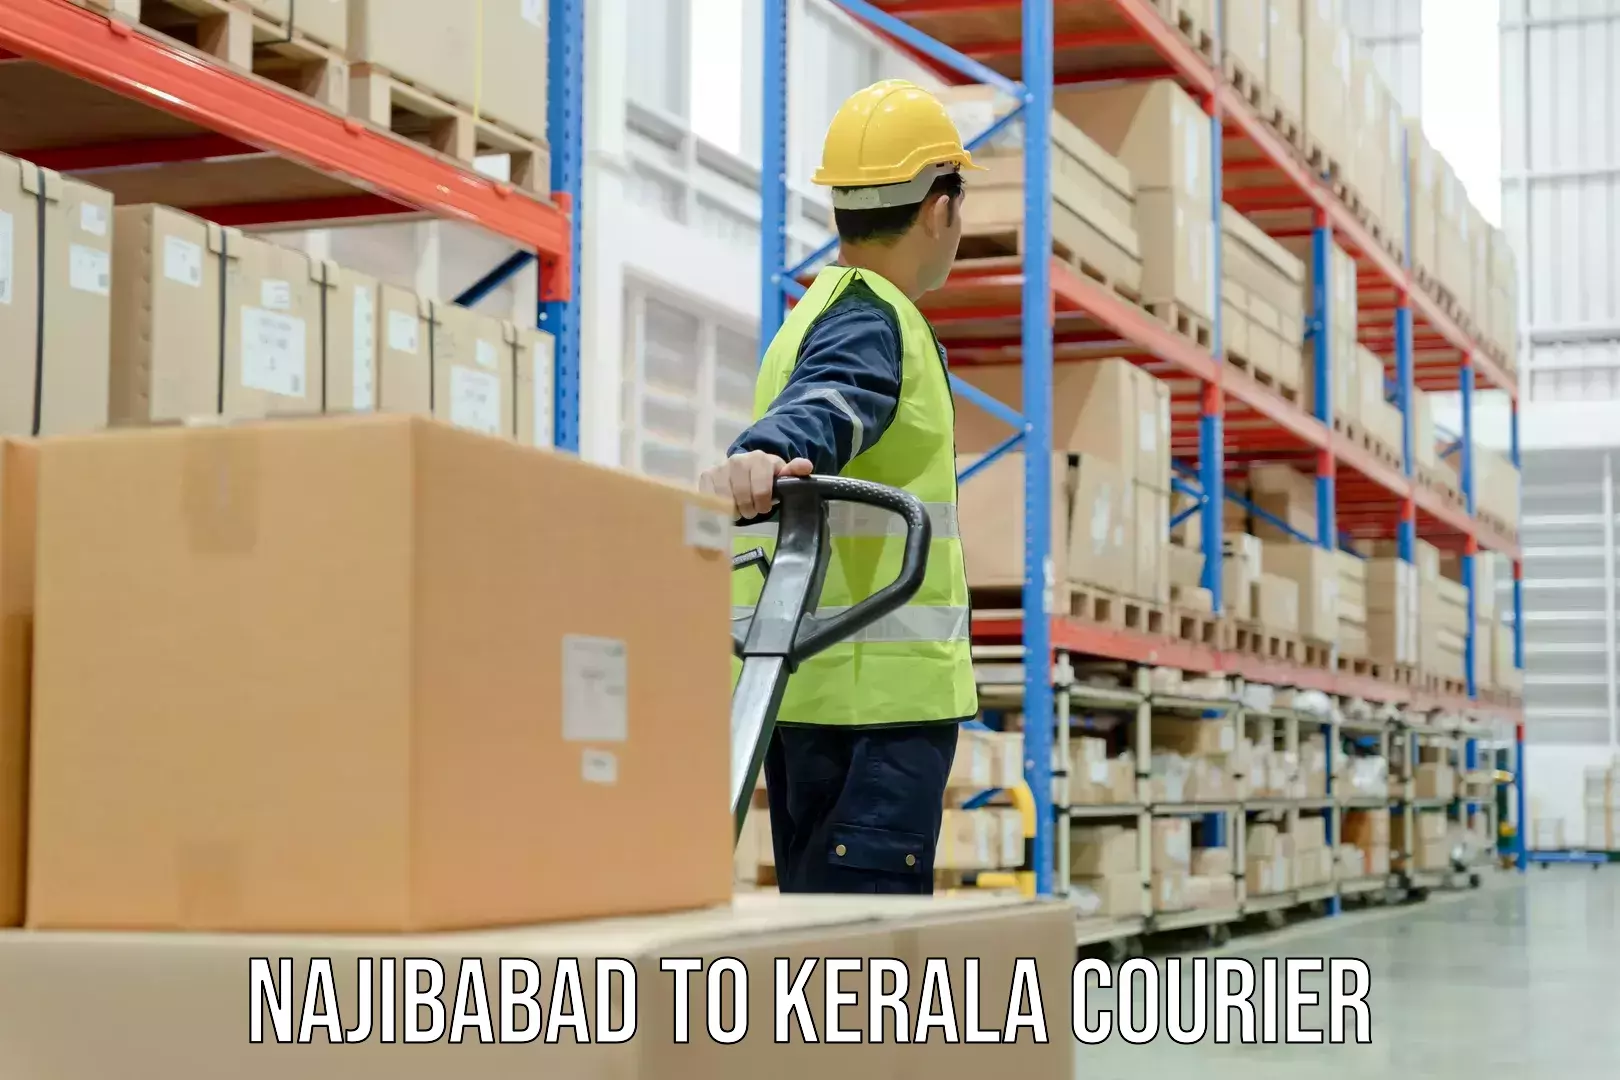 State-of-the-art courier technology Najibabad to Manjeshwar